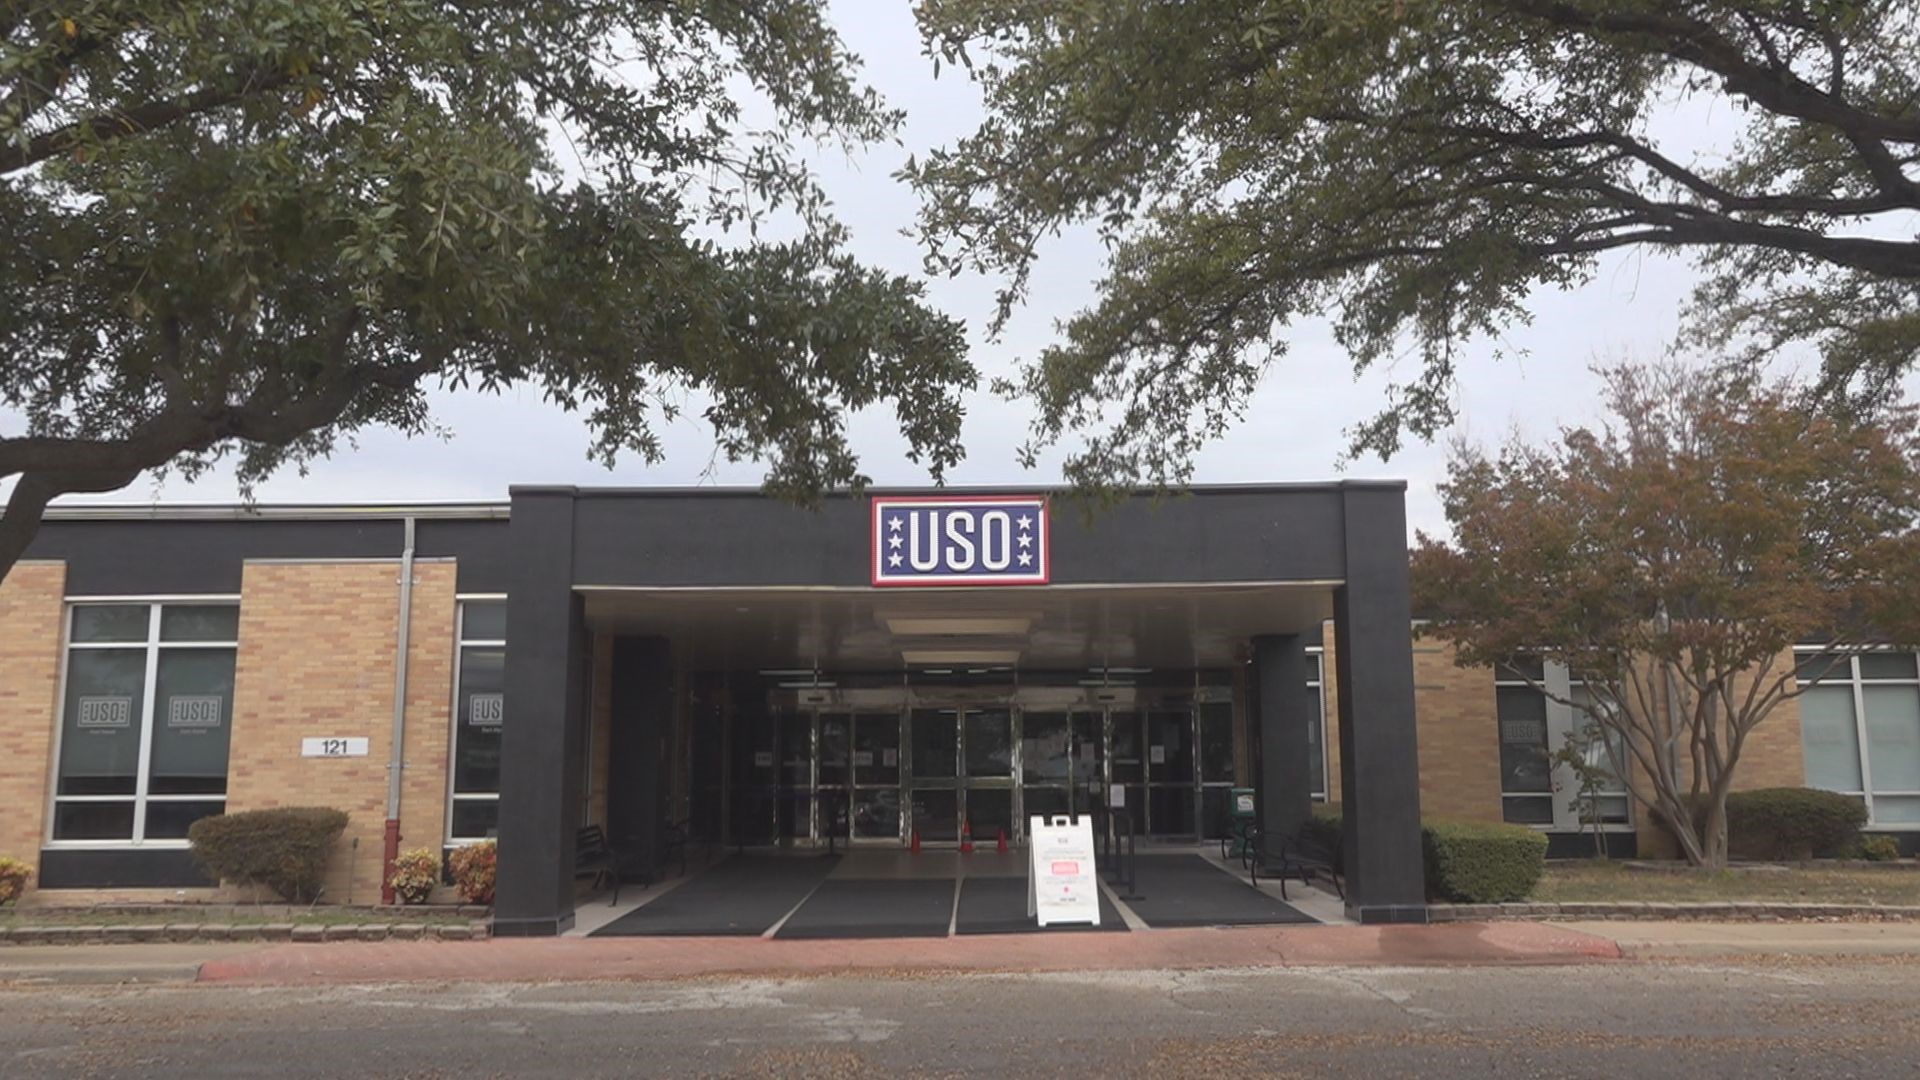 USO Fort Hood celebrates its 80th anniversary. Here is how the program changes the lives of soldiers.